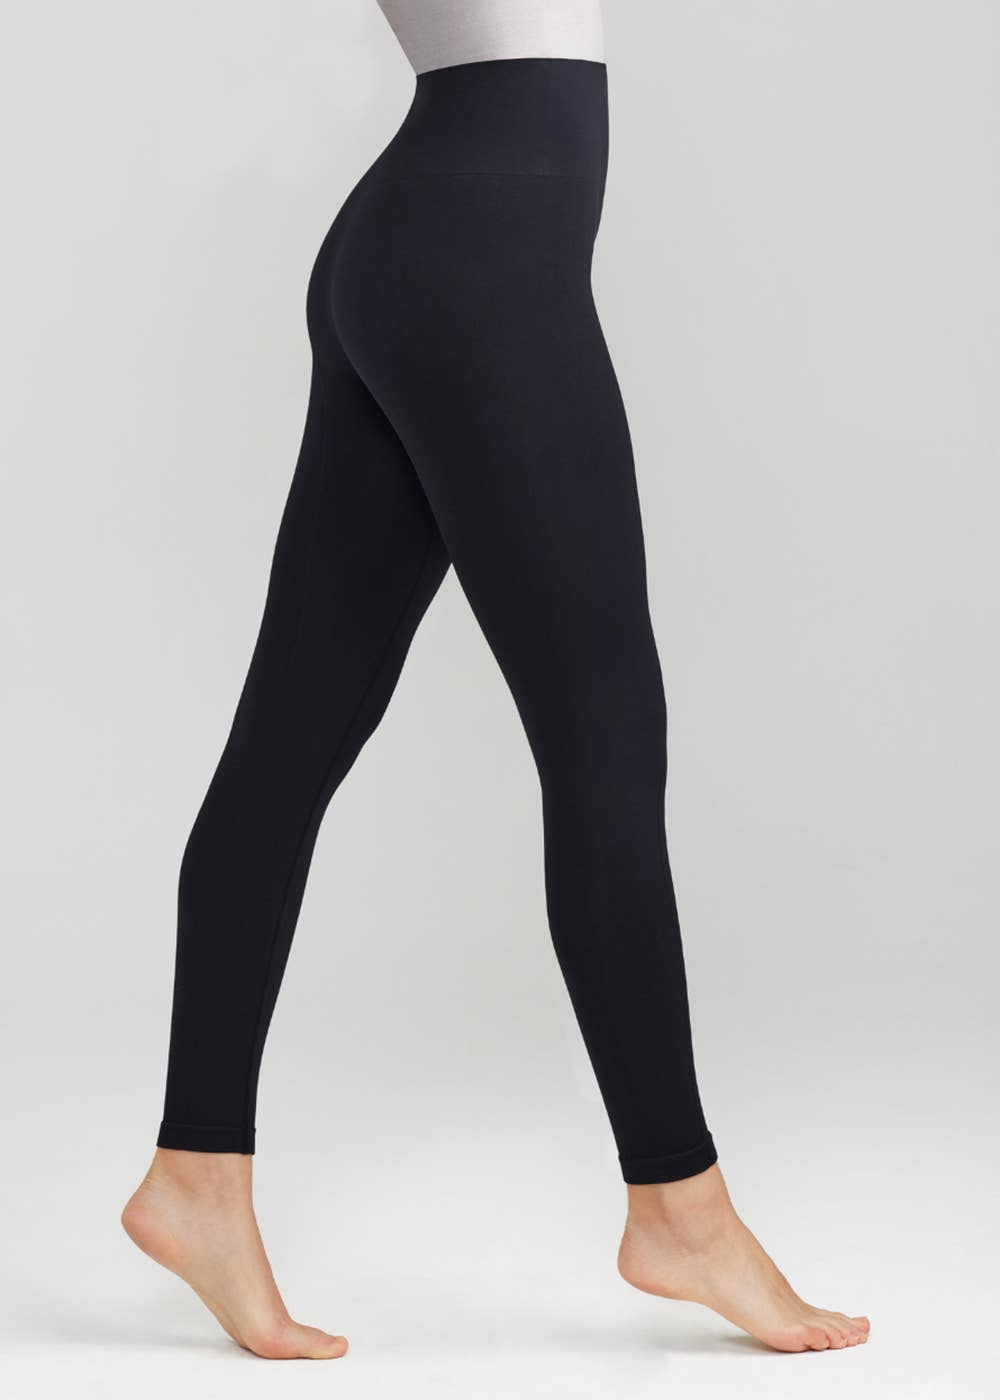 Wholesale Women's Clothing Assorted Accessories Garments Leggings Blac –  NYWholesale.com